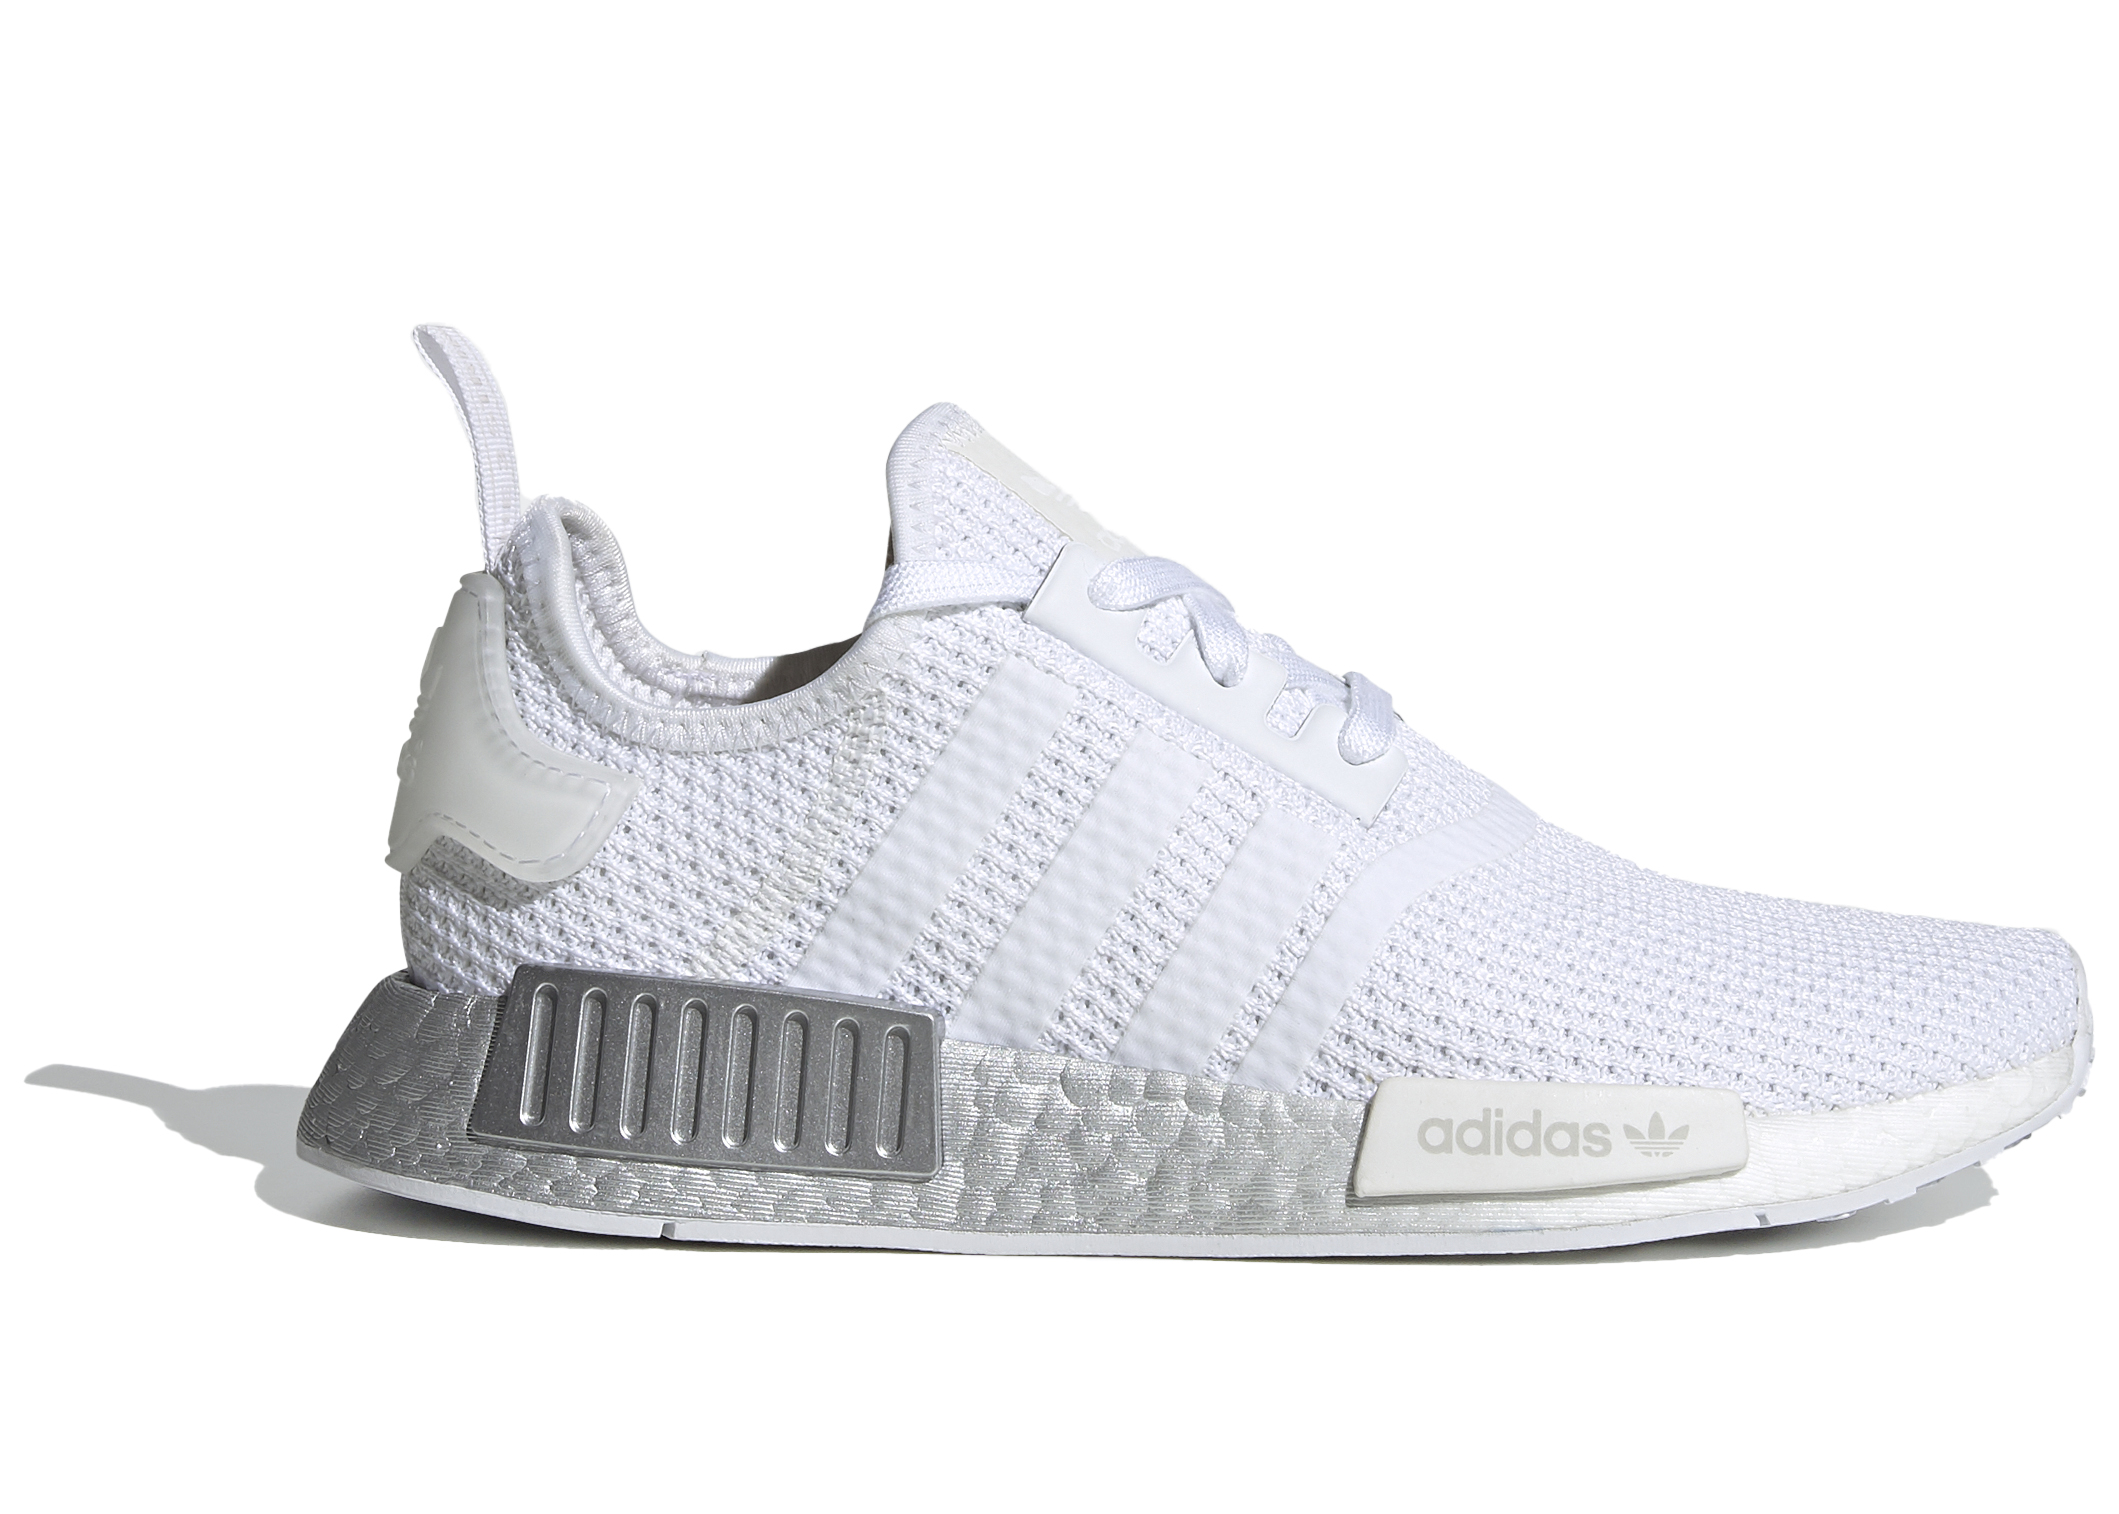 nmd r1 size 6.5